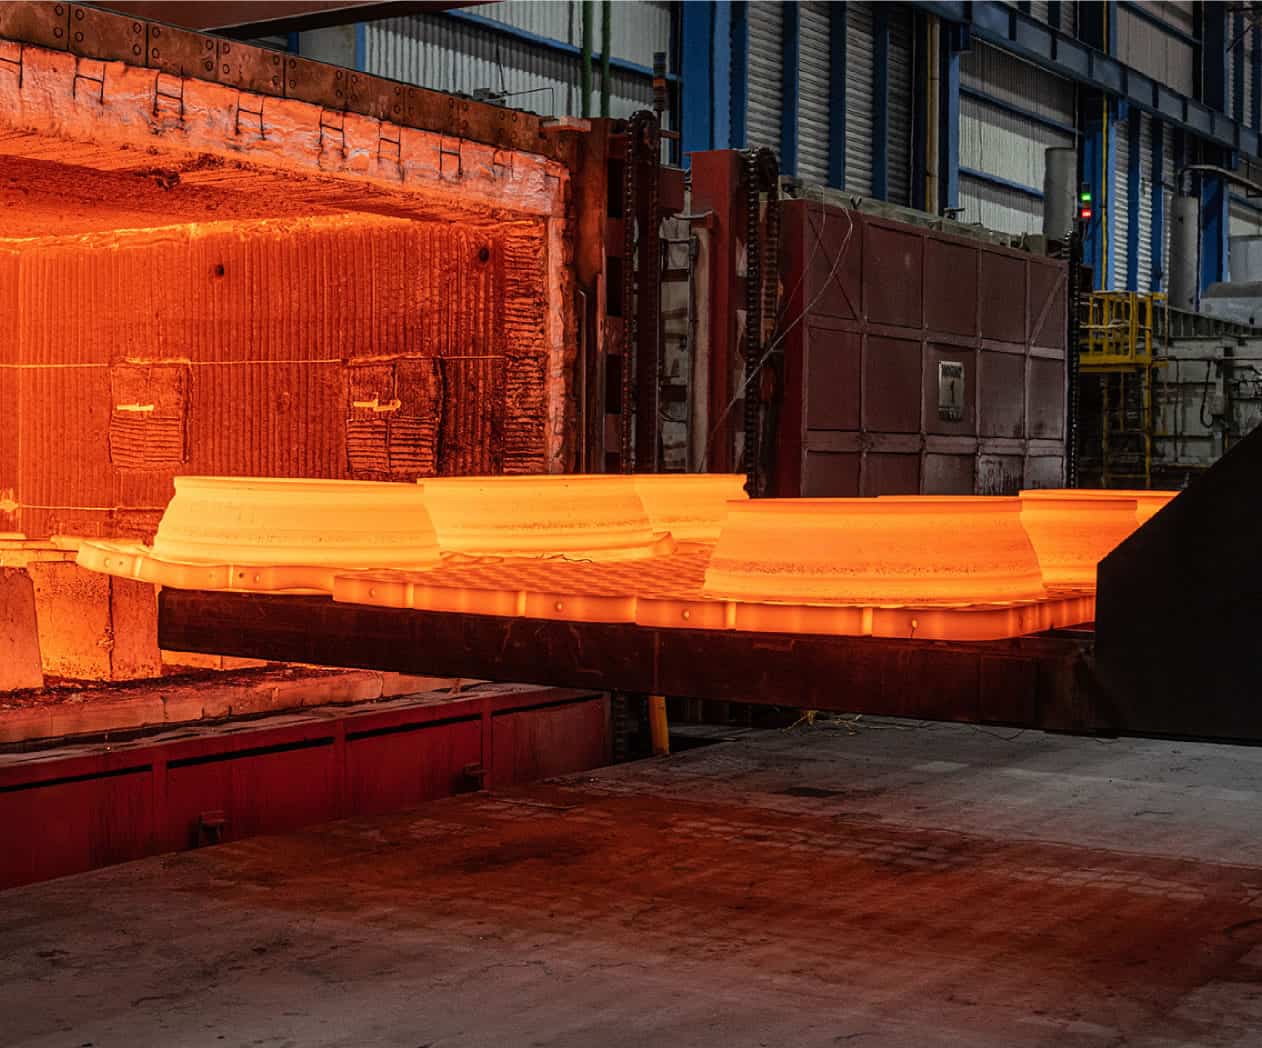 Glowing steel slabs being transported by a large mechanical arm in an industrial factory setting.